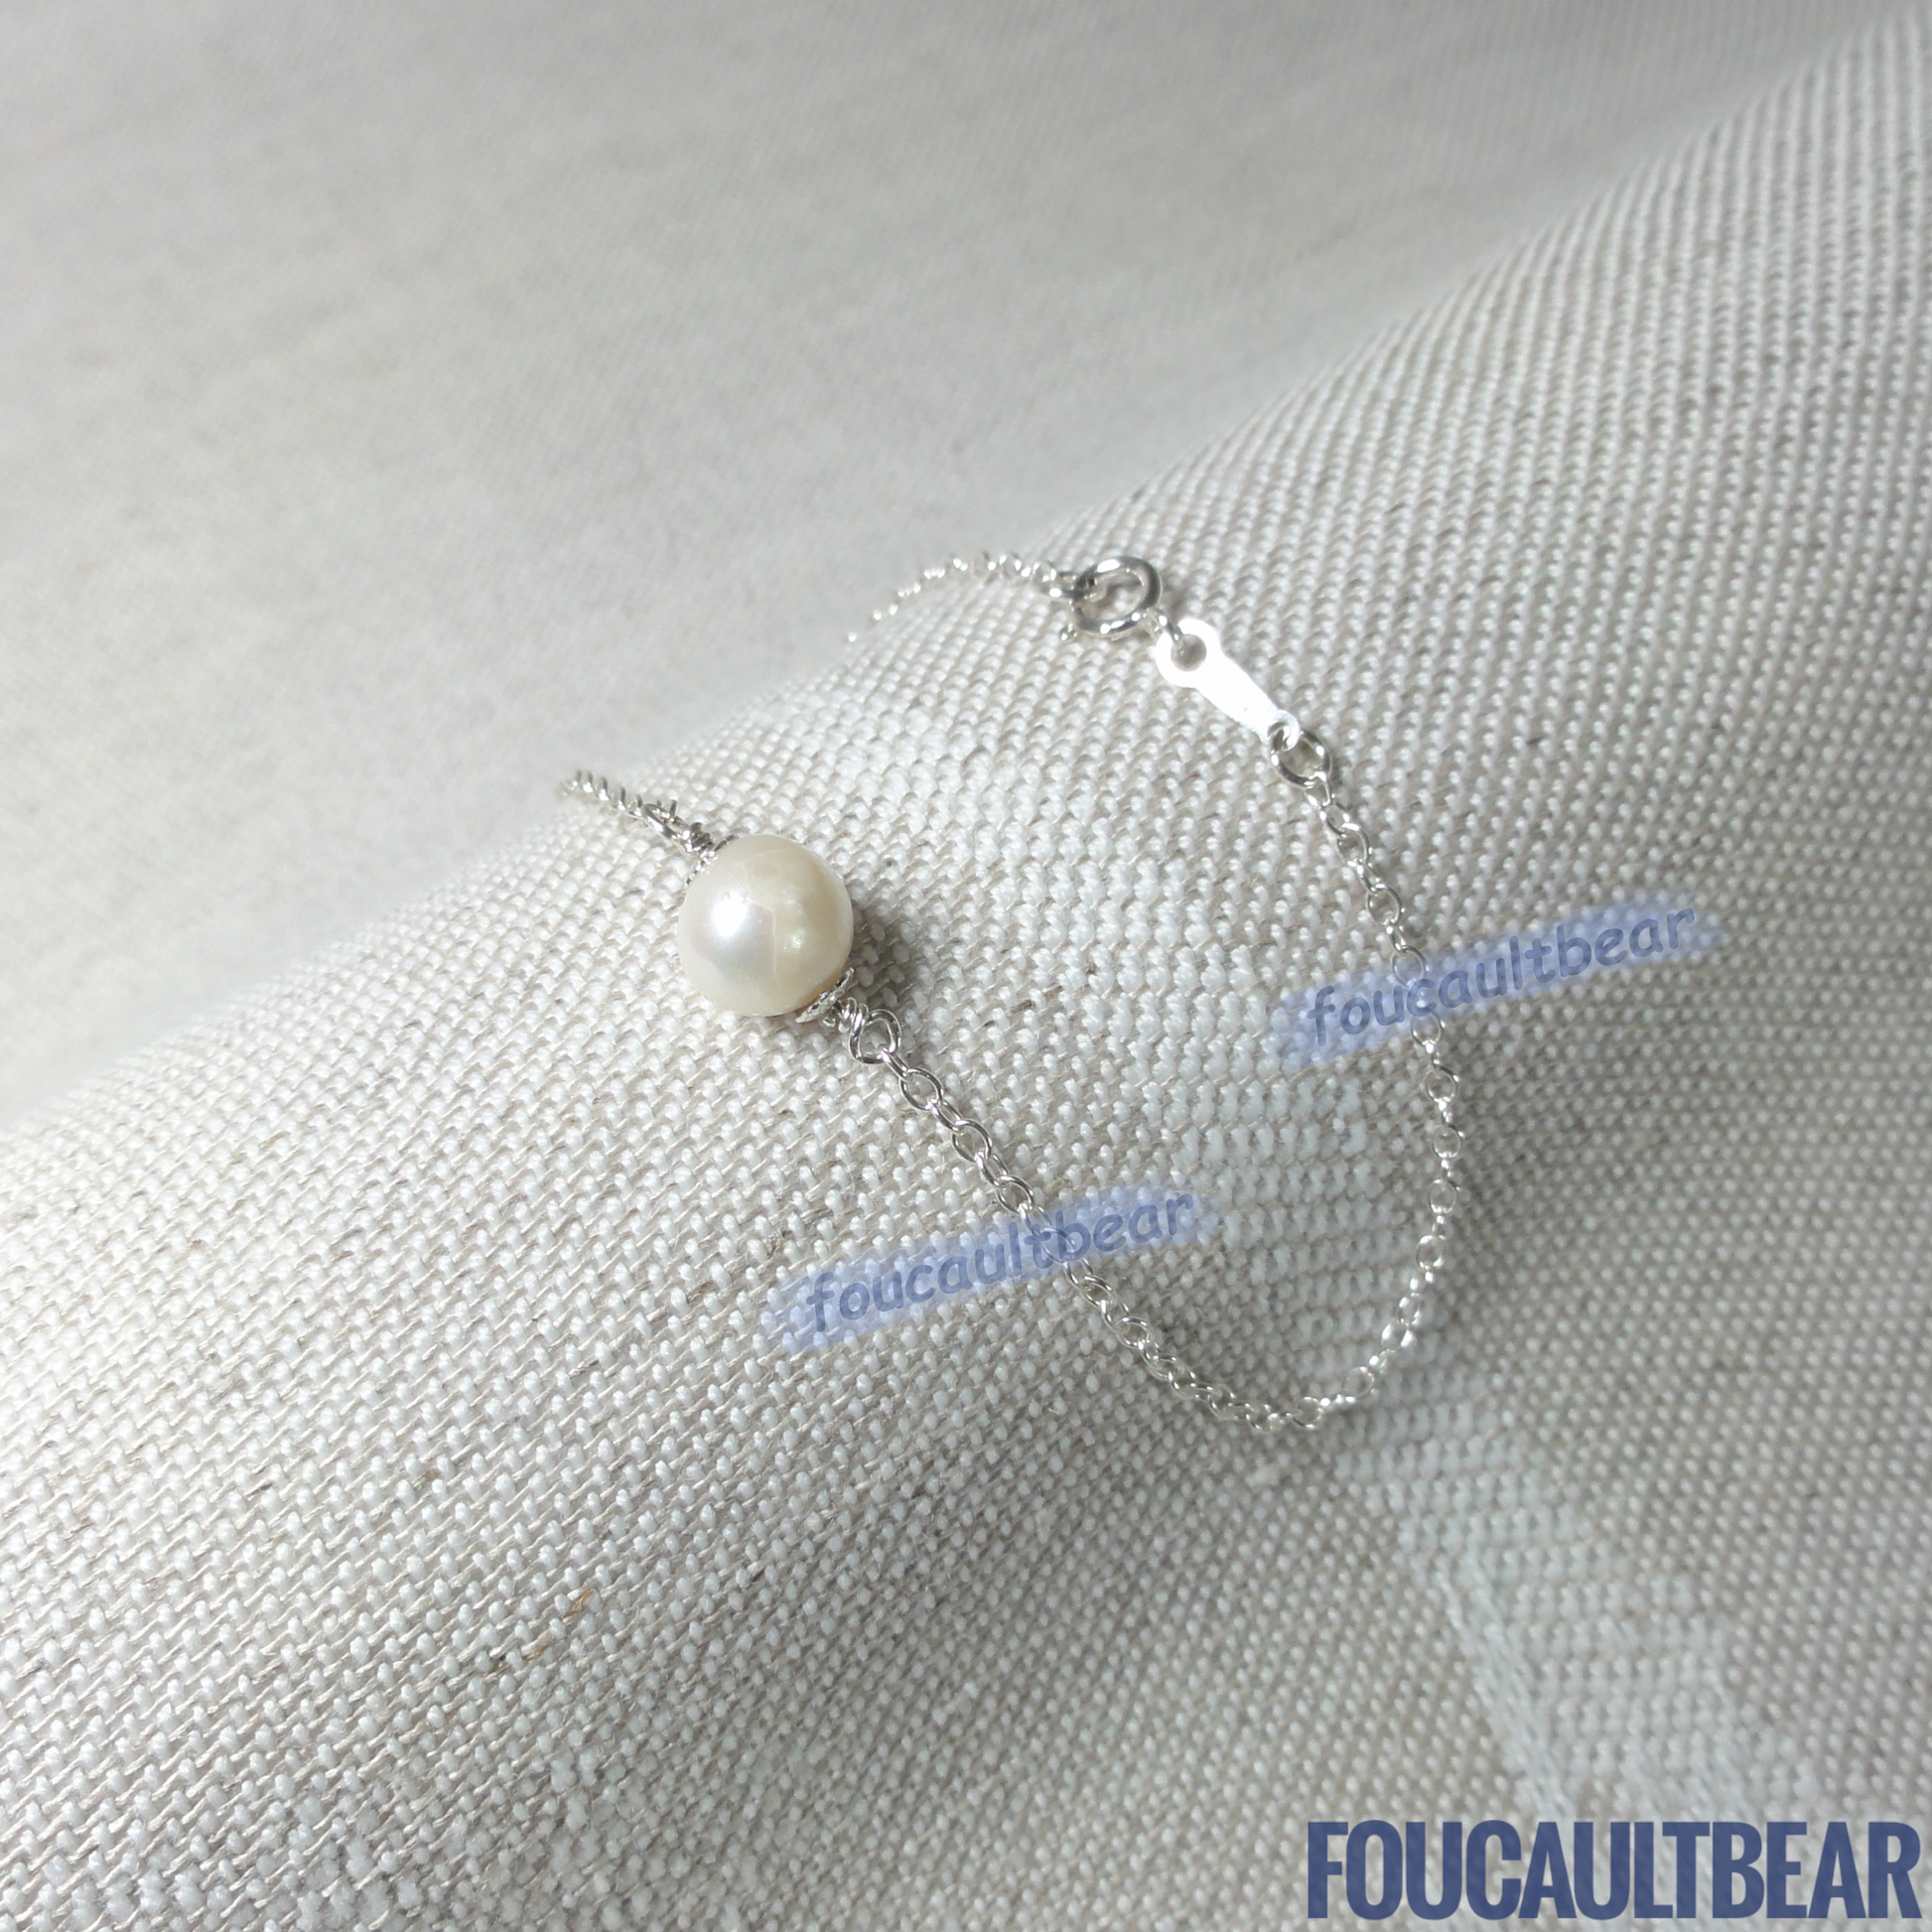 Foucaultbear's HANDCRAFTED BRACELET. Natural Freshwater Pearl (7-8mm near-round). All 925 Sterling Silver Components. Custom Lengths Available. This Natural Freshwater Pearl (7-8mm near-round), 925 Sterling Silver bracelet is simplicity at its best! Makes for a great daily wardrobe staple, as well as Just-Because and Occasion gift. Makes for a wonderful wedding party or bridesmaid gift too. This freshwater pearl has natural spots (not completely smooth) with good luster showing its unique characteristics. 